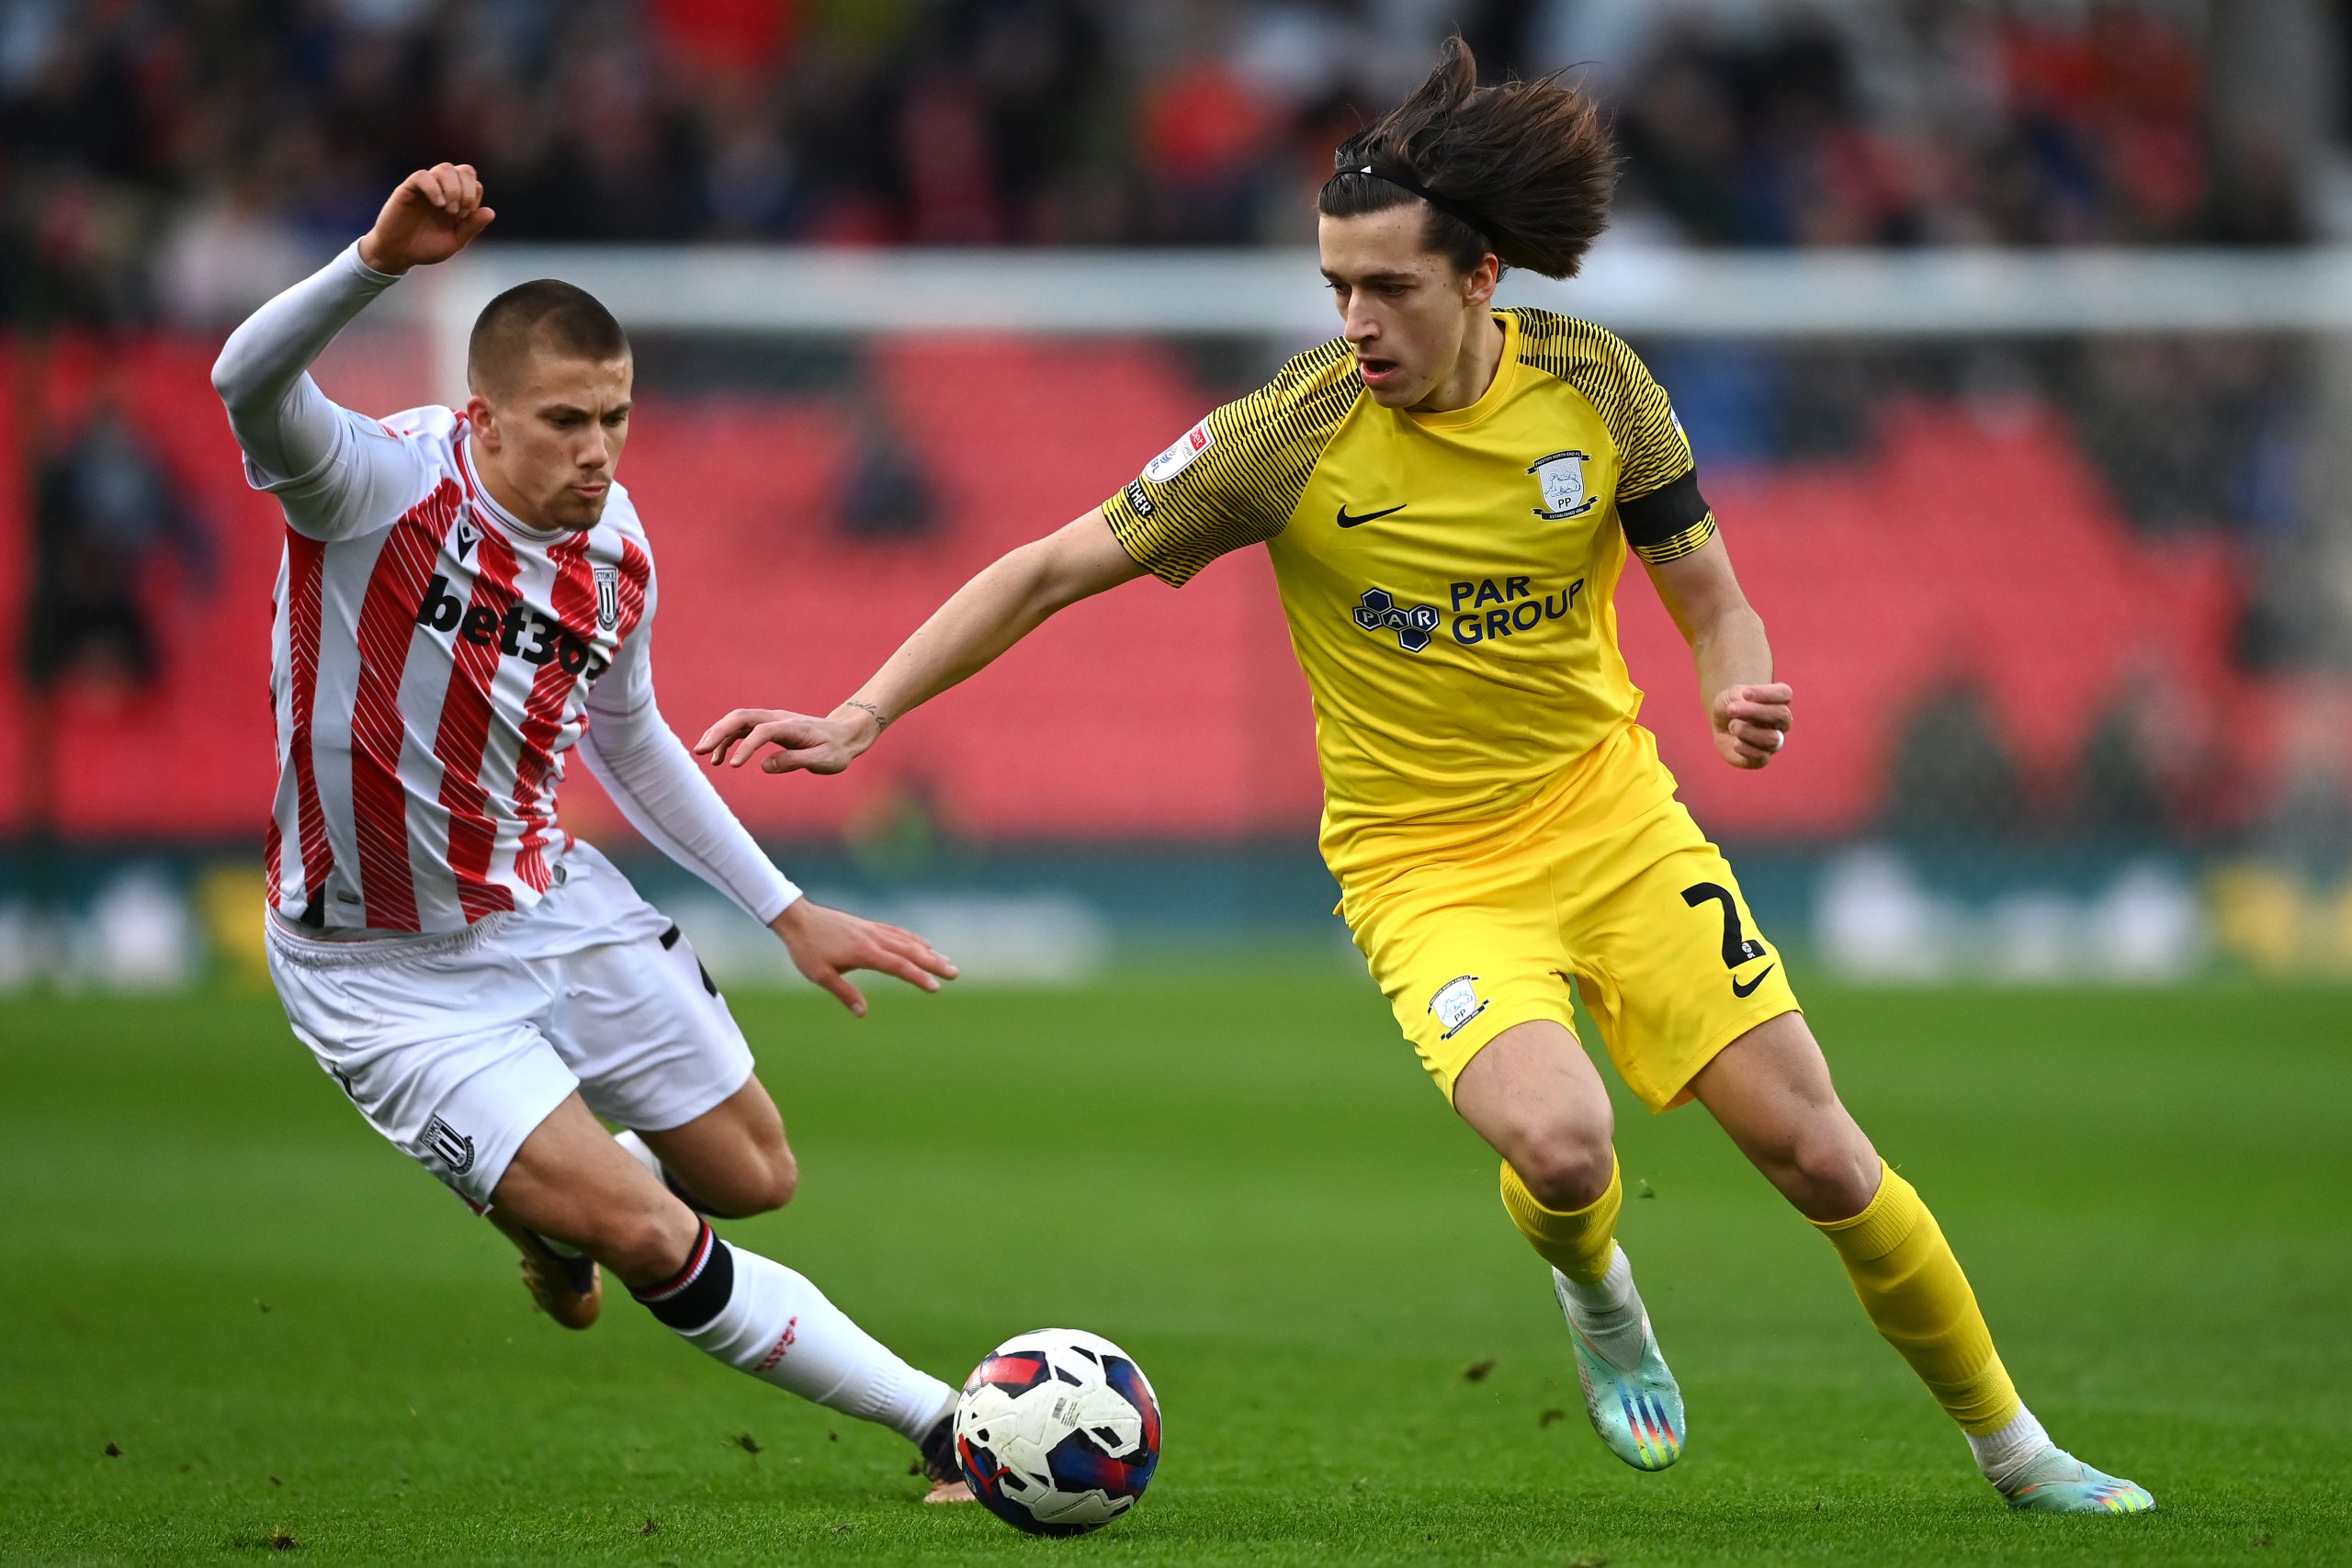 Alvaro Fernandez Preston North End battles for the ball with Harry Clarke of Stoke City Football Club during the Sky Bet Championship between Stoke City and Preston North End at Bet365 Stadium on January 02, 2023 in Stoke on Trent, England.